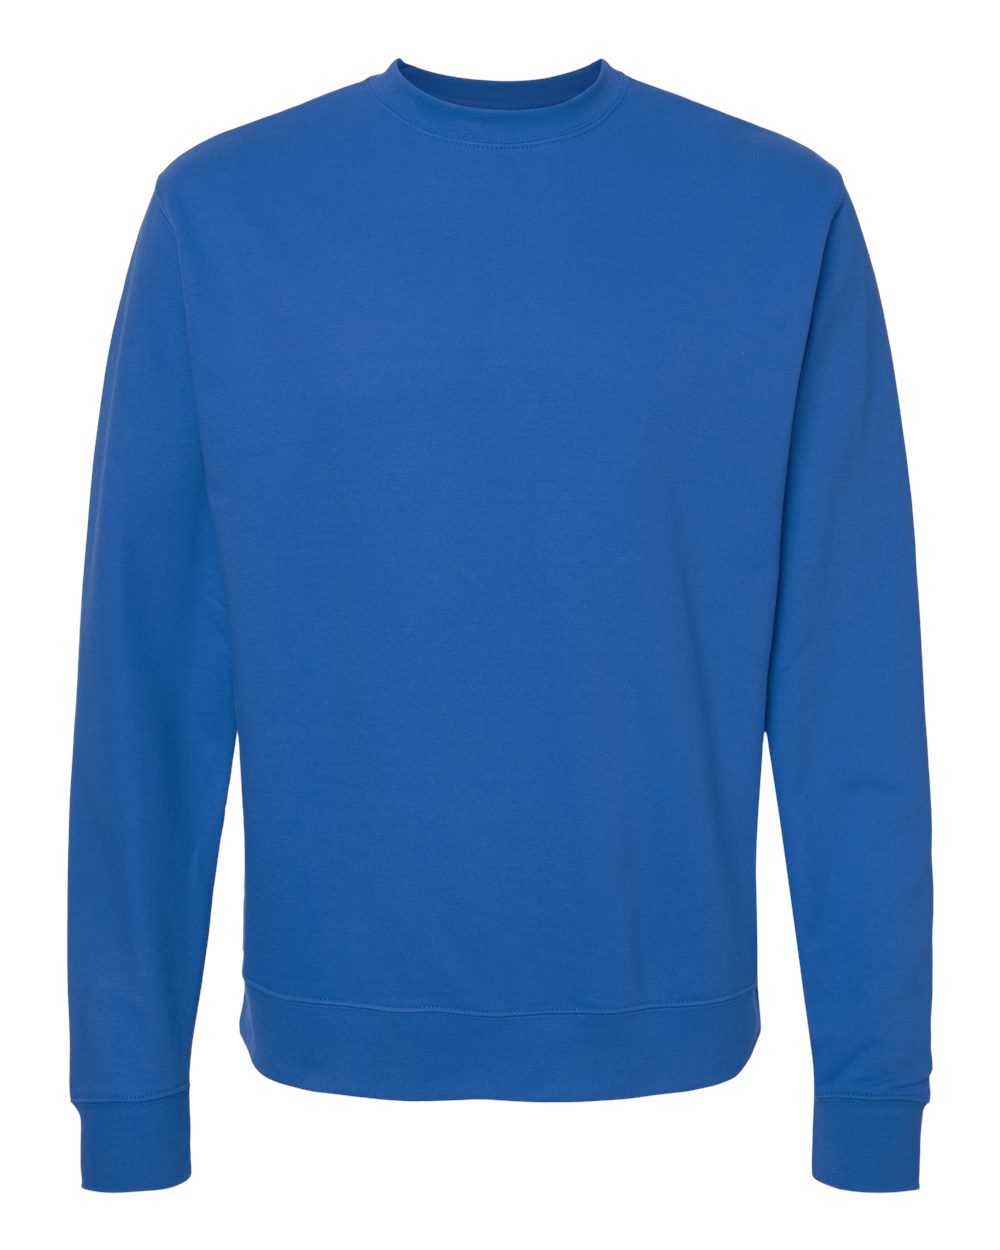 Independent Trading Co SS3000 Midweight Sweatshirt - Royal - HIT a Double - 1